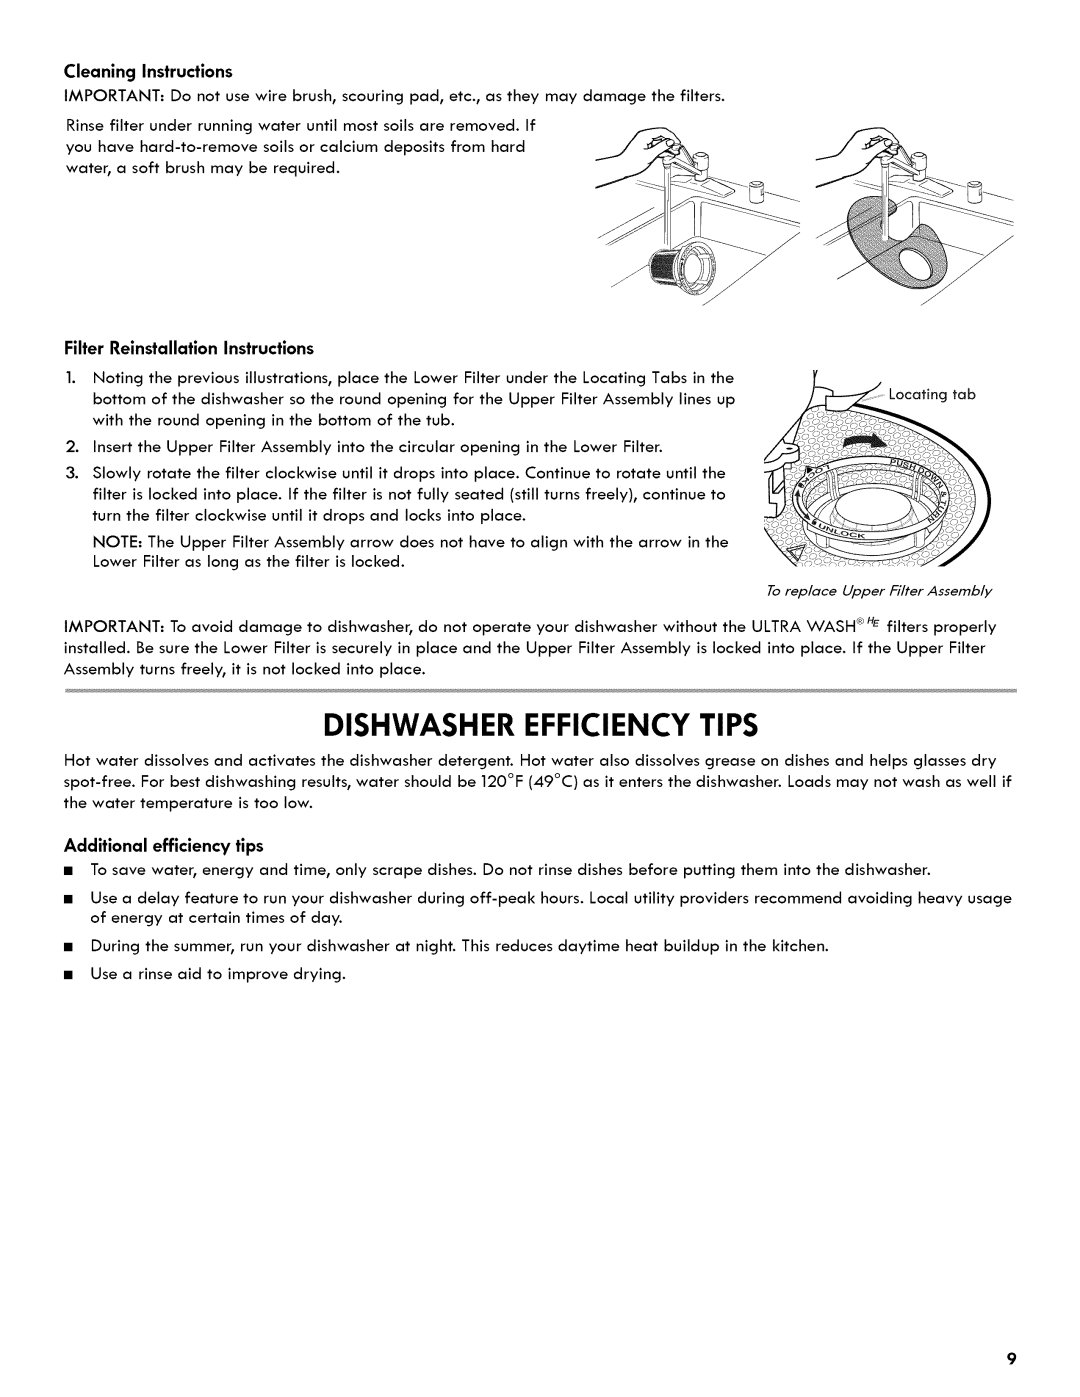 Kenmore 665.1404 manual Dishwasher Efficiency Tips, Cleaning Instructions, Filter Reinstallation Instructions 